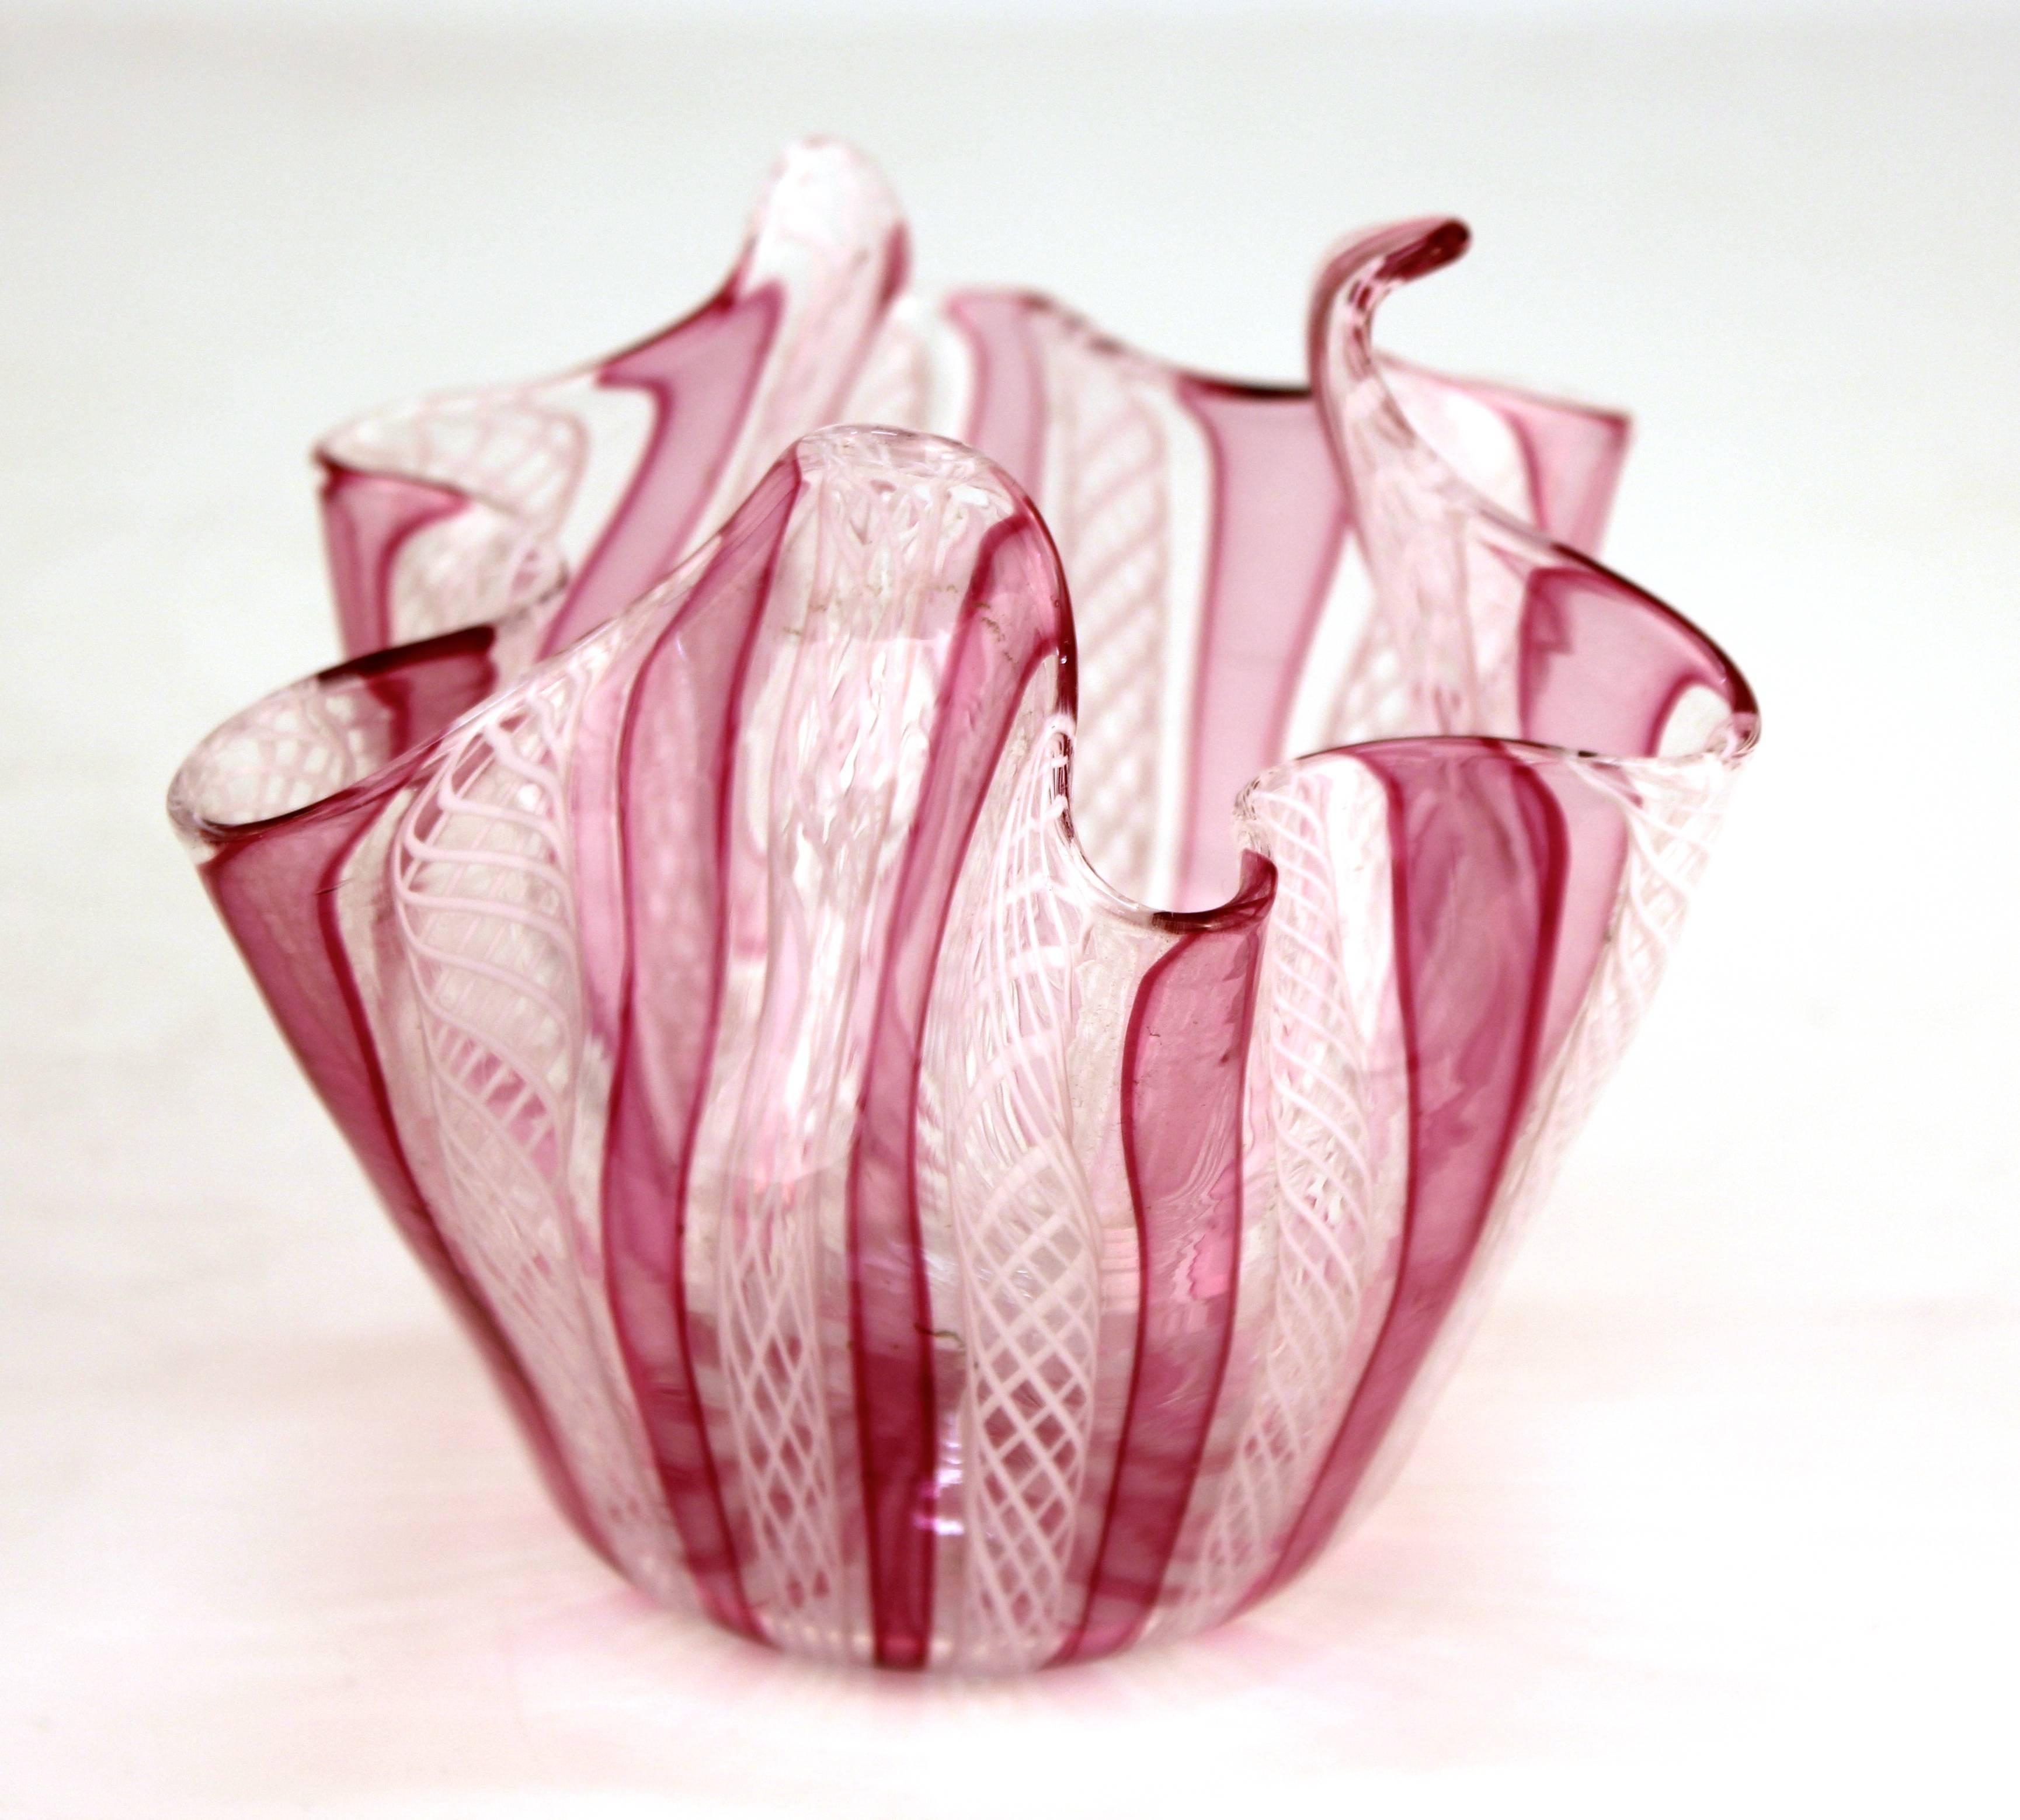 A Mid-Century Modern Murano art glass handkerchief vase in pink and white stripes. The piece was made in Italy and is in good vintage condition.